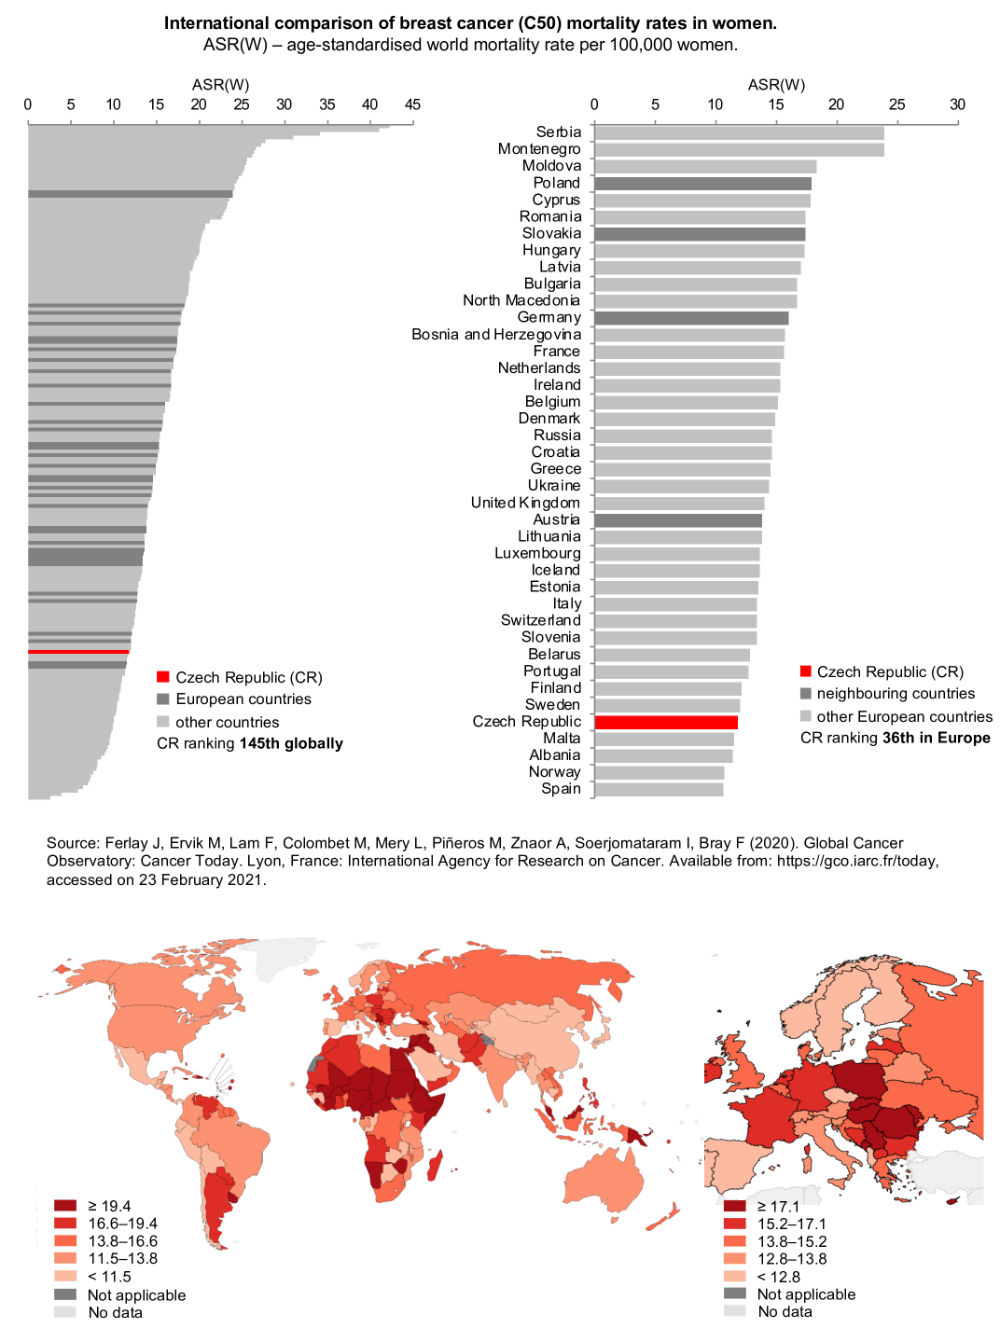 Figure 2: International comparison of breast cancer (C50) mortality rates in women. ASR(W) – age-standardised world mortality rate per 100,000 women. (Source: GLOBOCAN 2020)